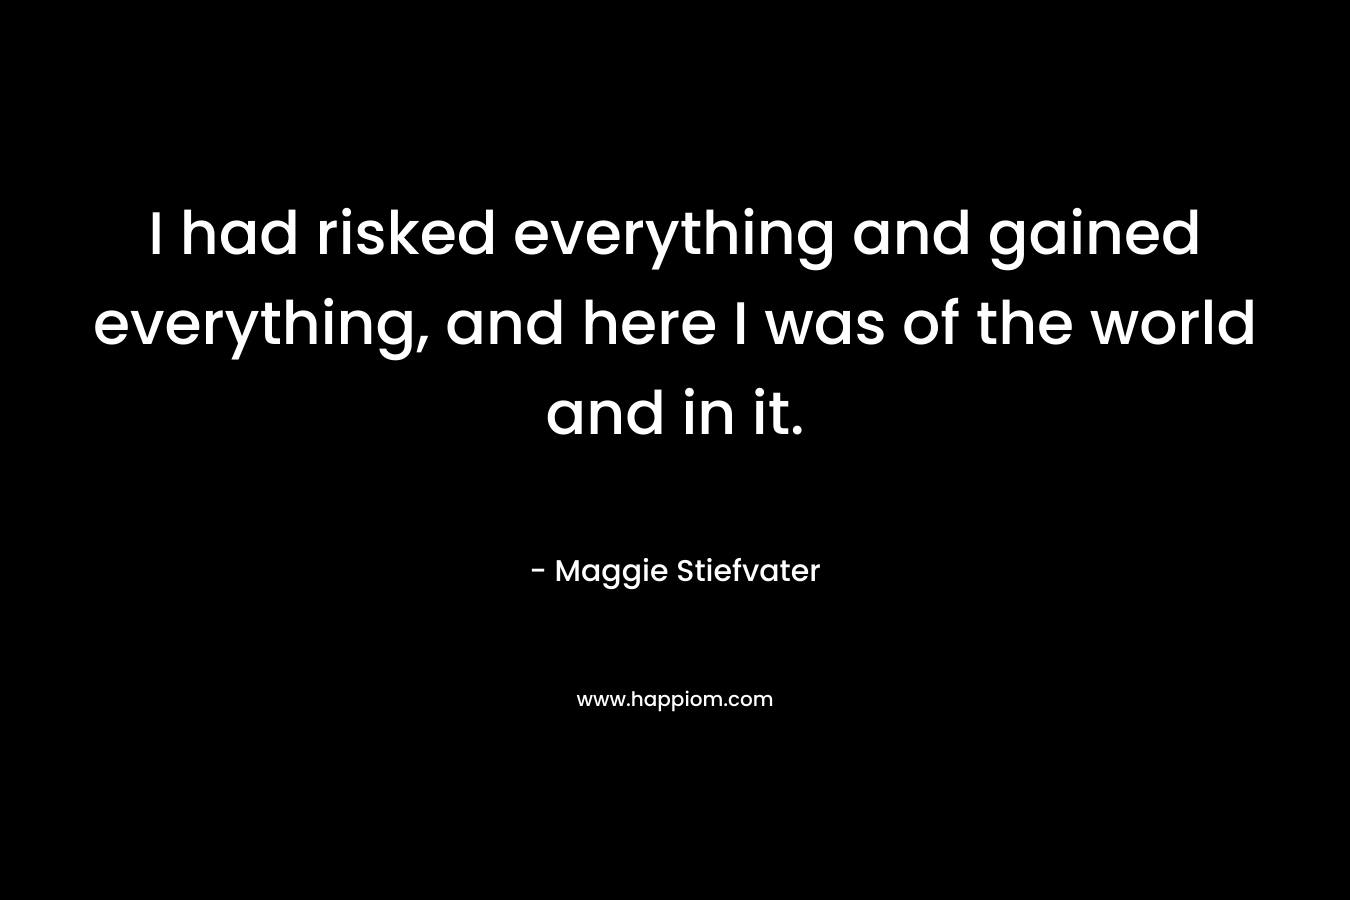 I had risked everything and gained everything, and here I was of the world and in it.